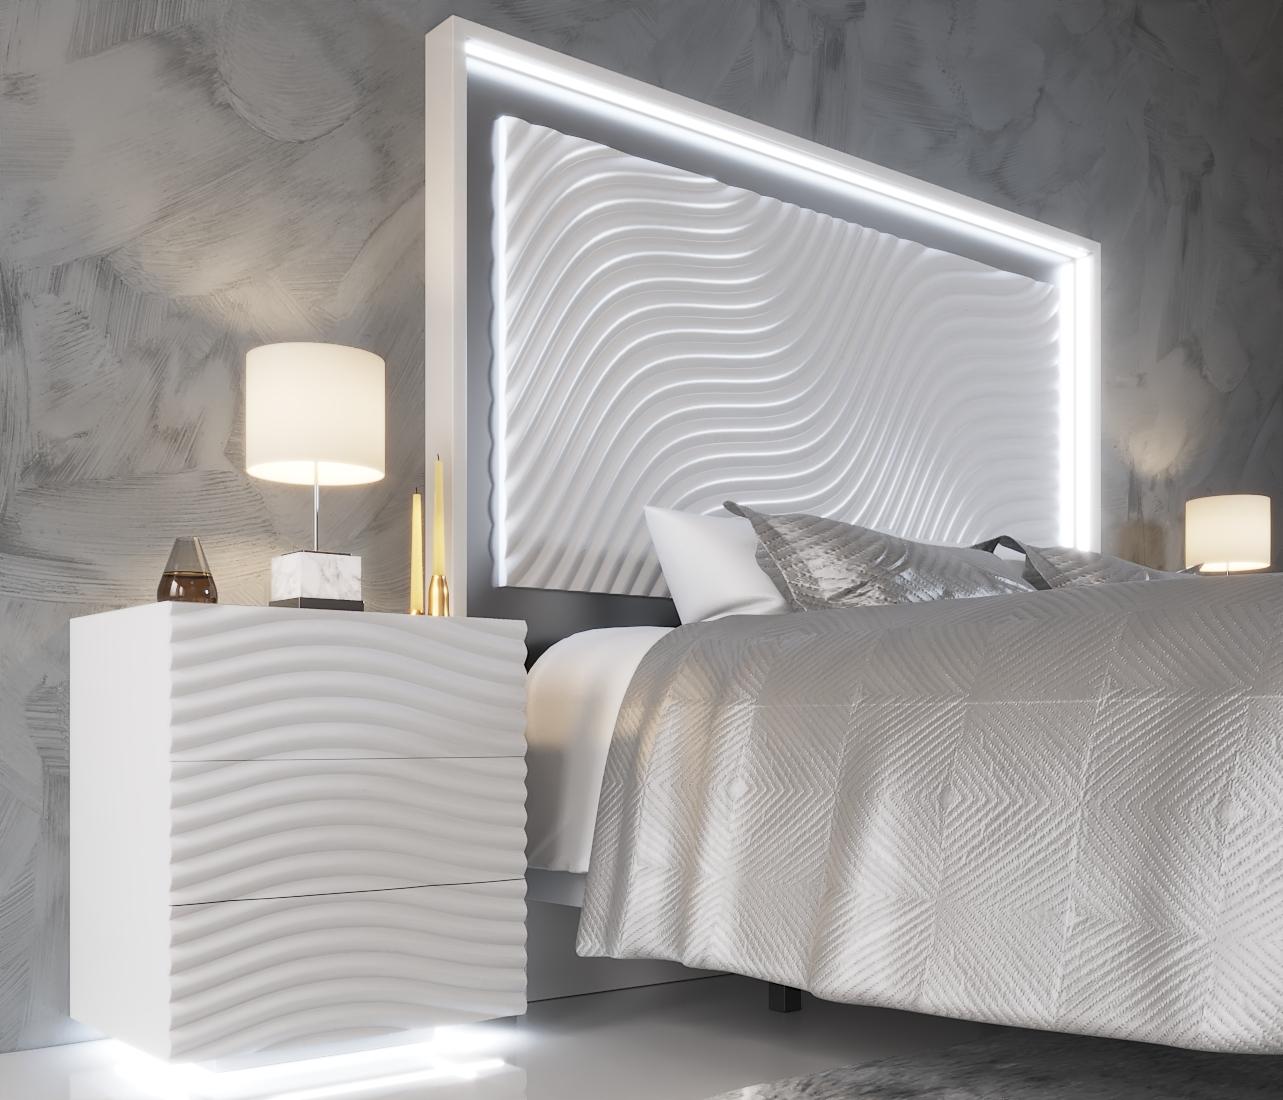 

    
Glam Shiny White Queen Bed WAVE ESF Contemporary Modern MADE IN SPAIN
